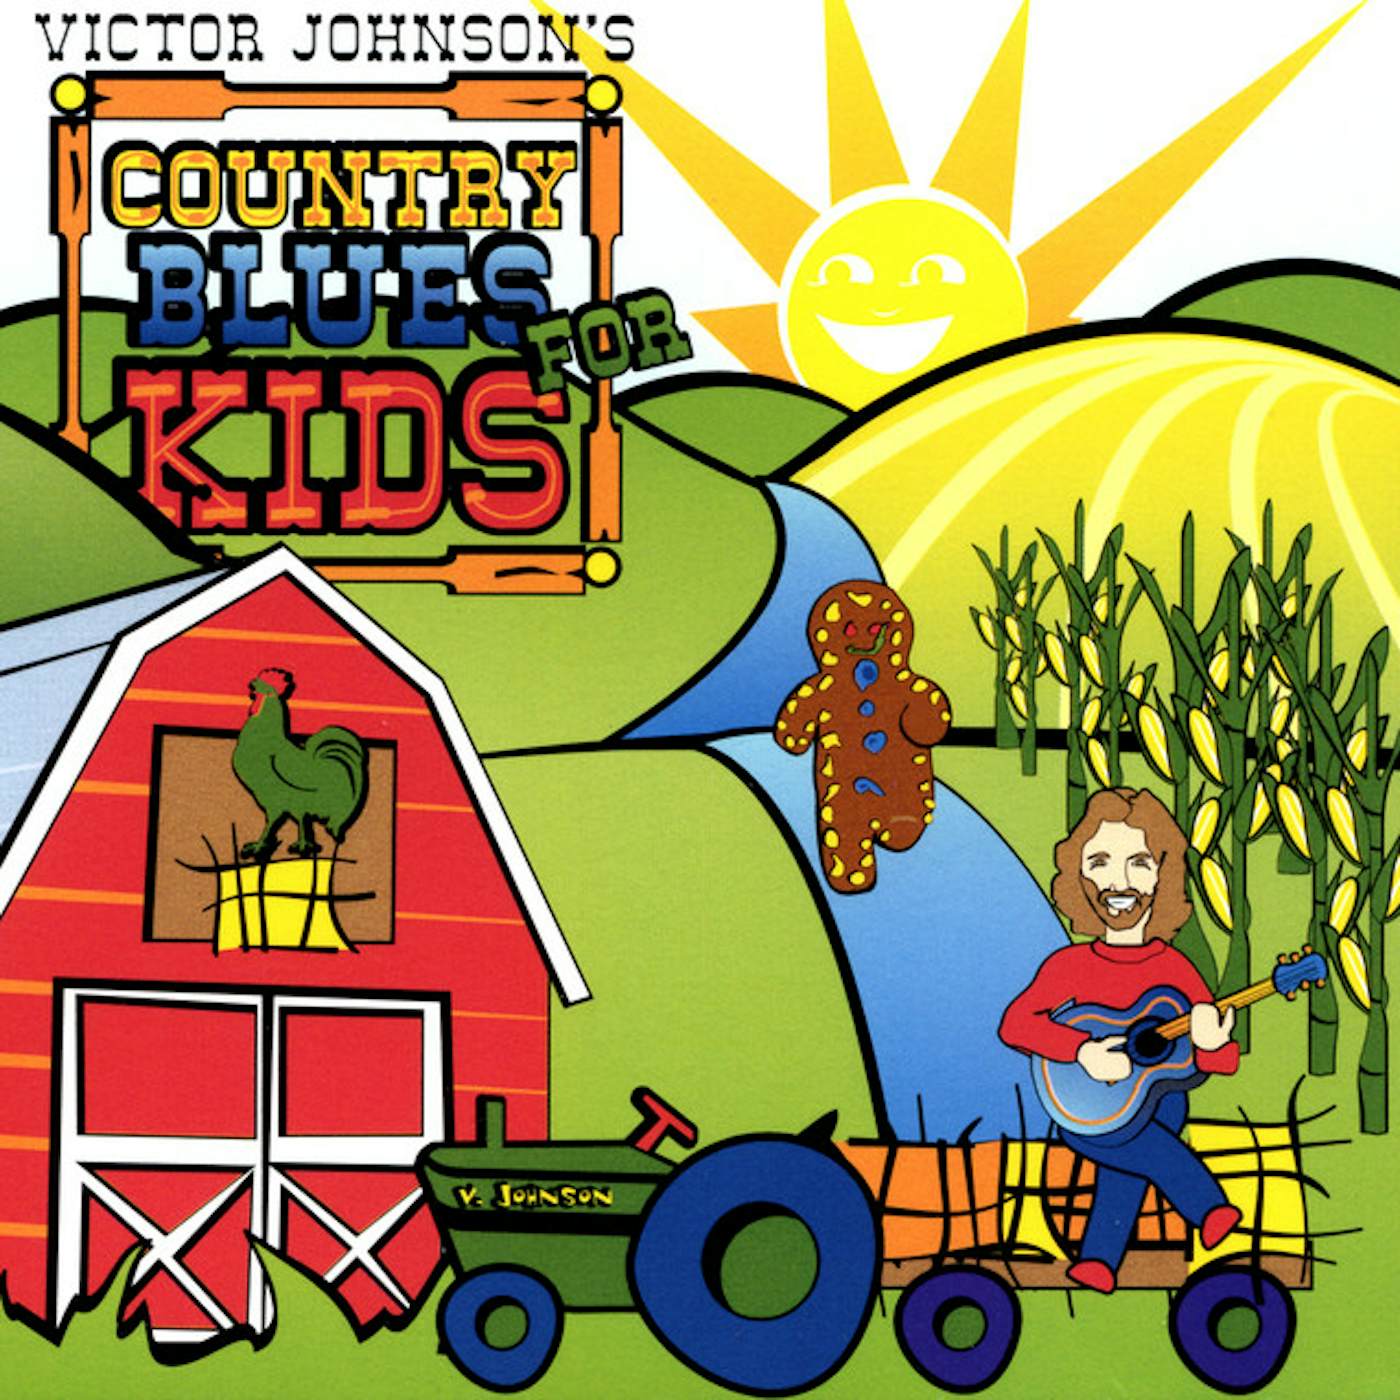 Victor Johnson COUNTRY BLUES FOR KIDS CD